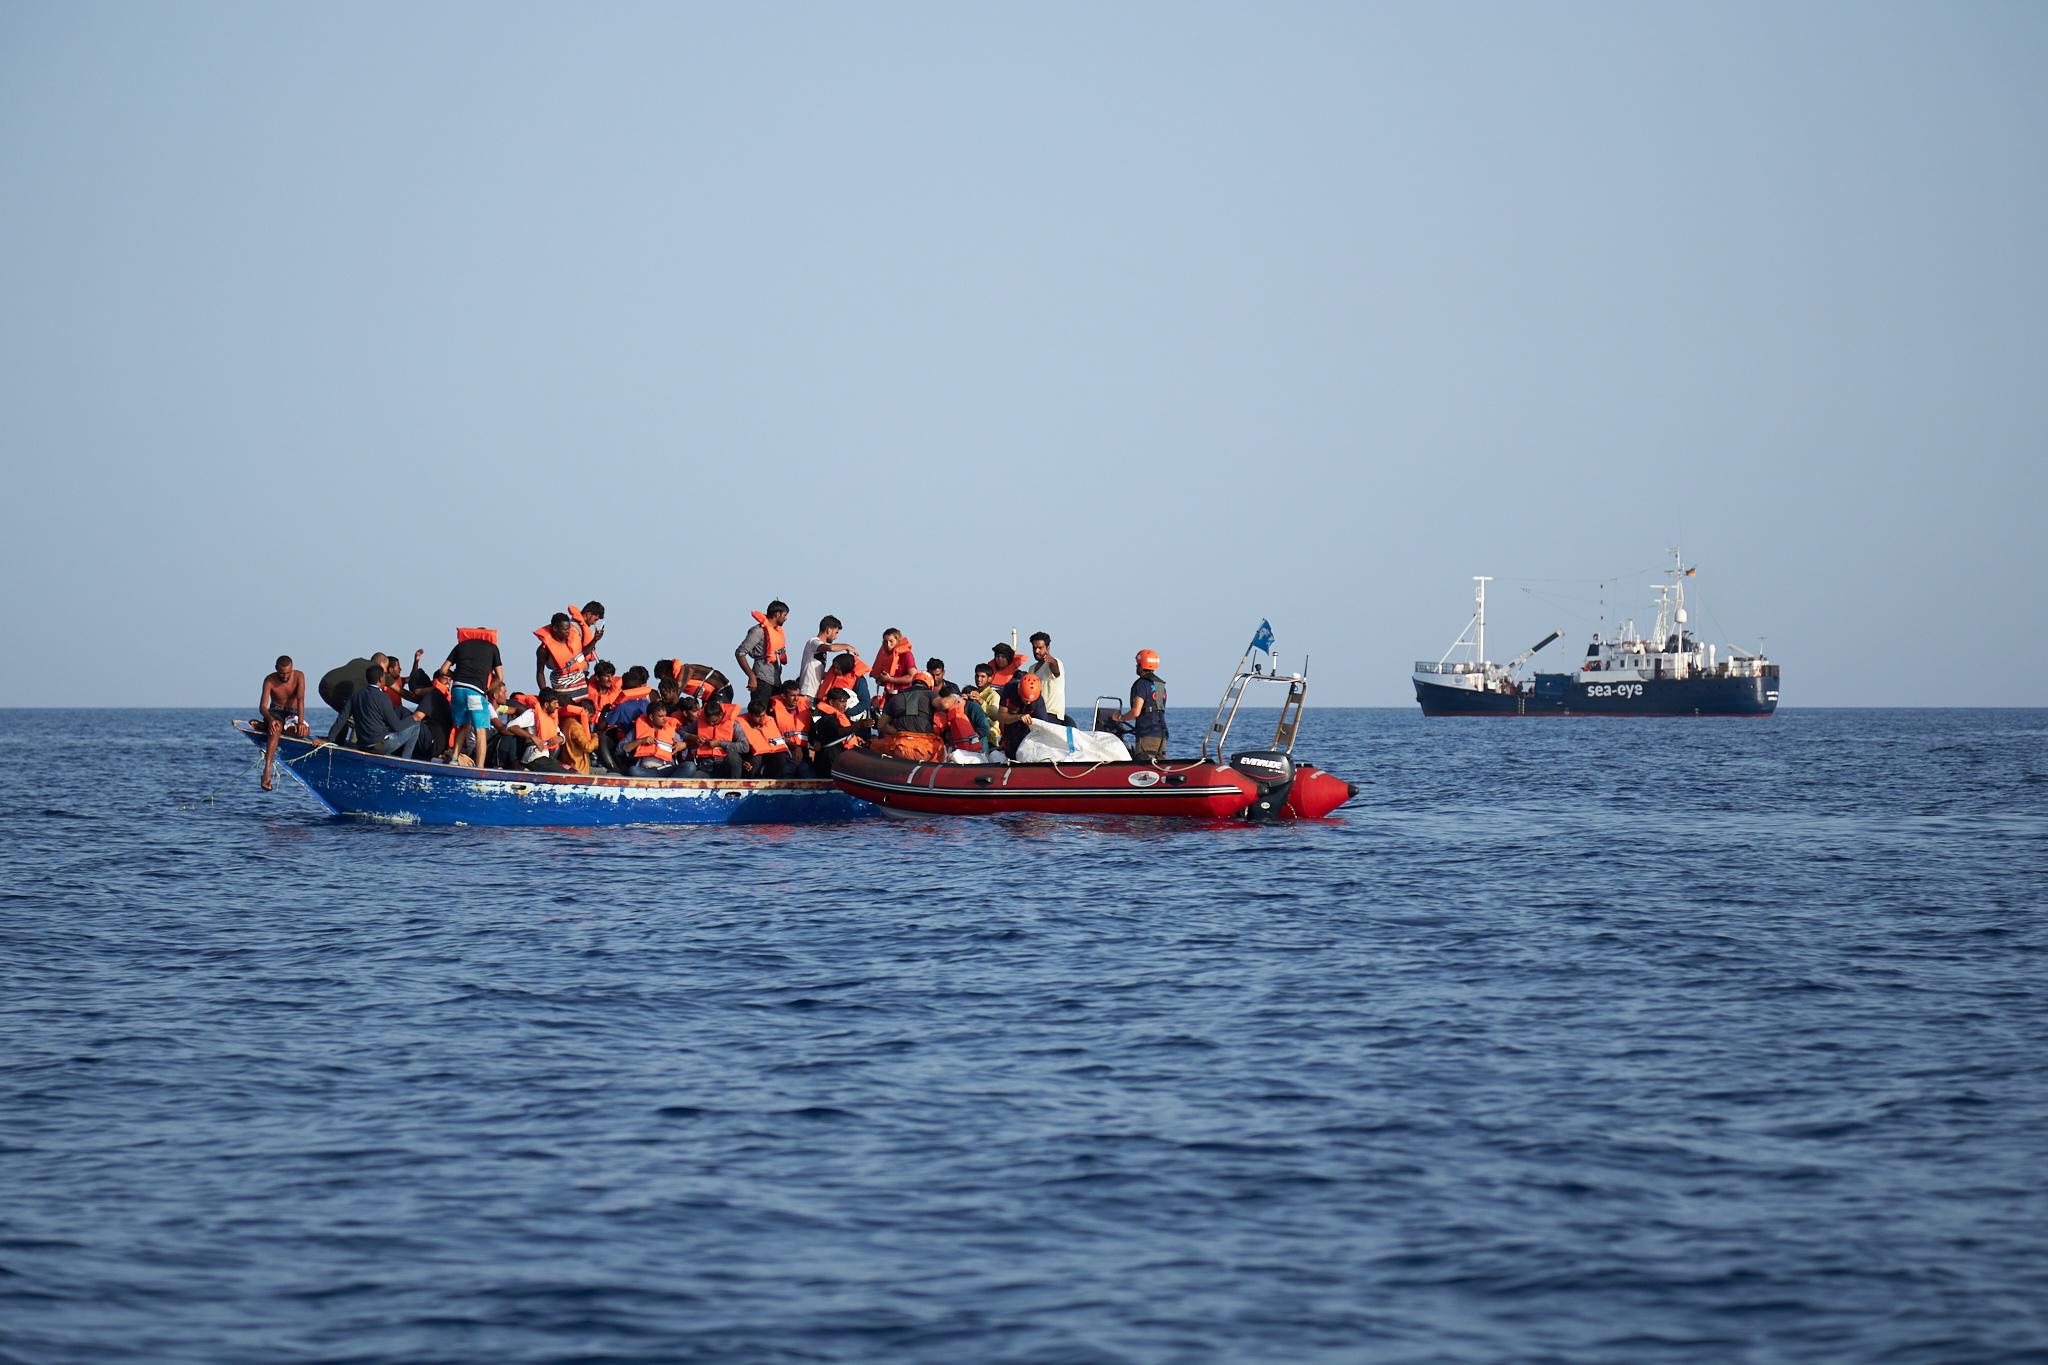 epa07704799 A handout photo made available by German civil sea rescue organisation sea-eye shows a boat carrying migrants (L) and a rescue boat of sea-eye, in the Mediterranean Sea, 08 July 2019 (issued 09 July 2019). According to sea-eye, 44 people were rescued from a woodden boat floating in the Mediterranean between Malta and Lampedusa. The migrants were taken onboard the Alan Kurdi rescue vessel operated by sea-eye and are expected to be transferred to land by the Maltese Navy.  EPA/FABIAN HEINZ / SEA-EYE HANDOUT  HANDOUT EDITORIAL USE ONLY/NO SALES